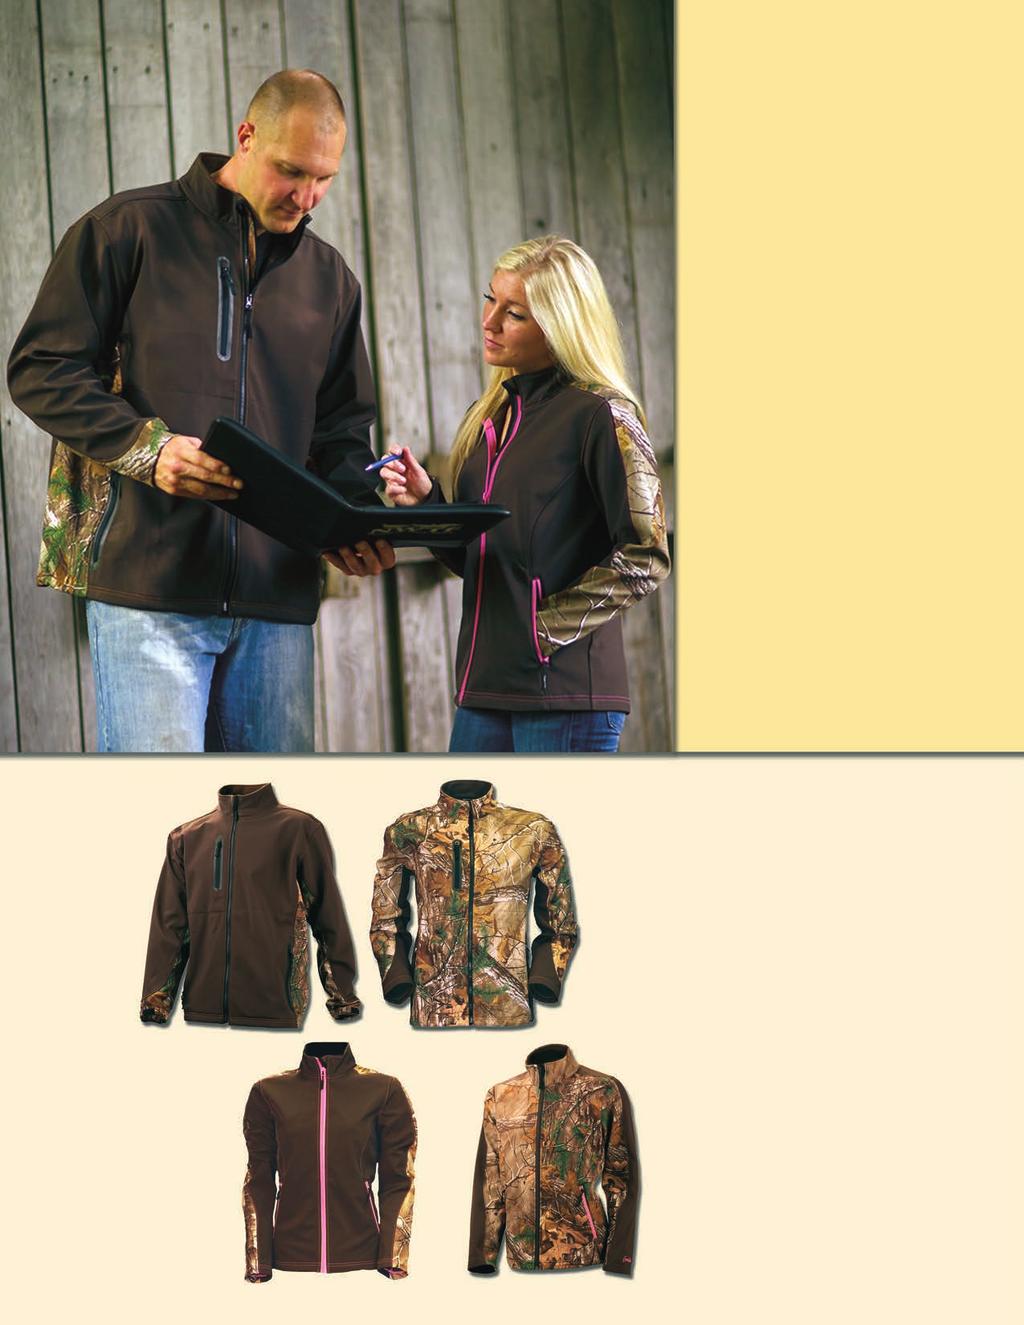 DAY BREAK JACKET Weatherproof Soft-Shell Jacket The jacket for those who work or play in the outdoors.